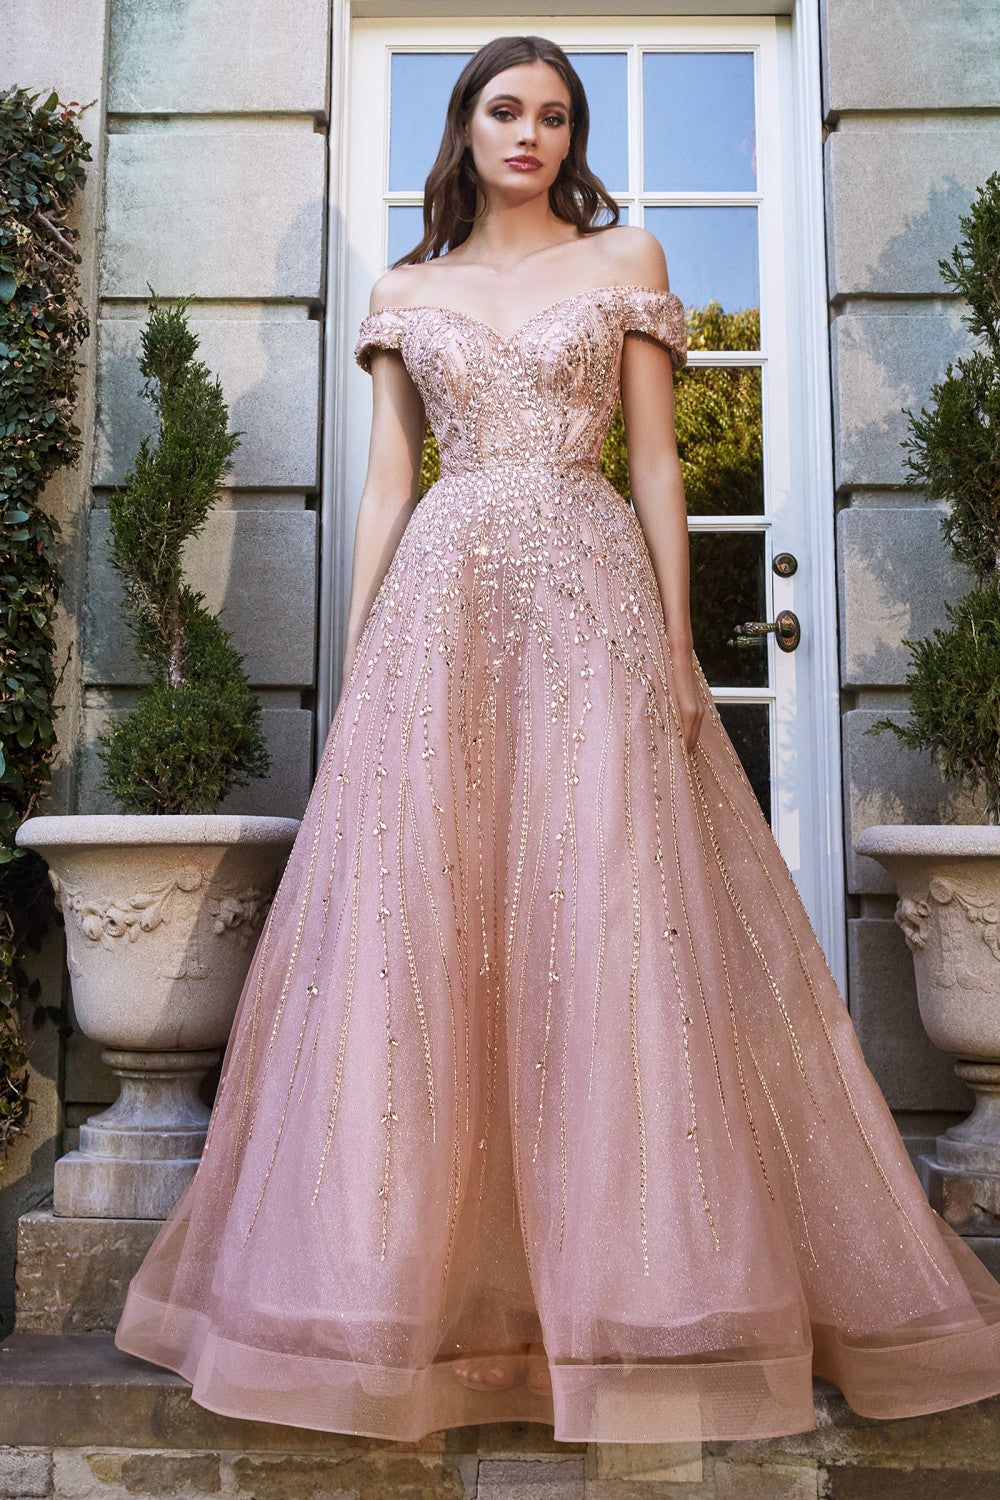 Rose Gold Gowns w/Jewel Embroidery, Sequin Bodice, Layered A-line Skirt & Vintage Style.-smcdress